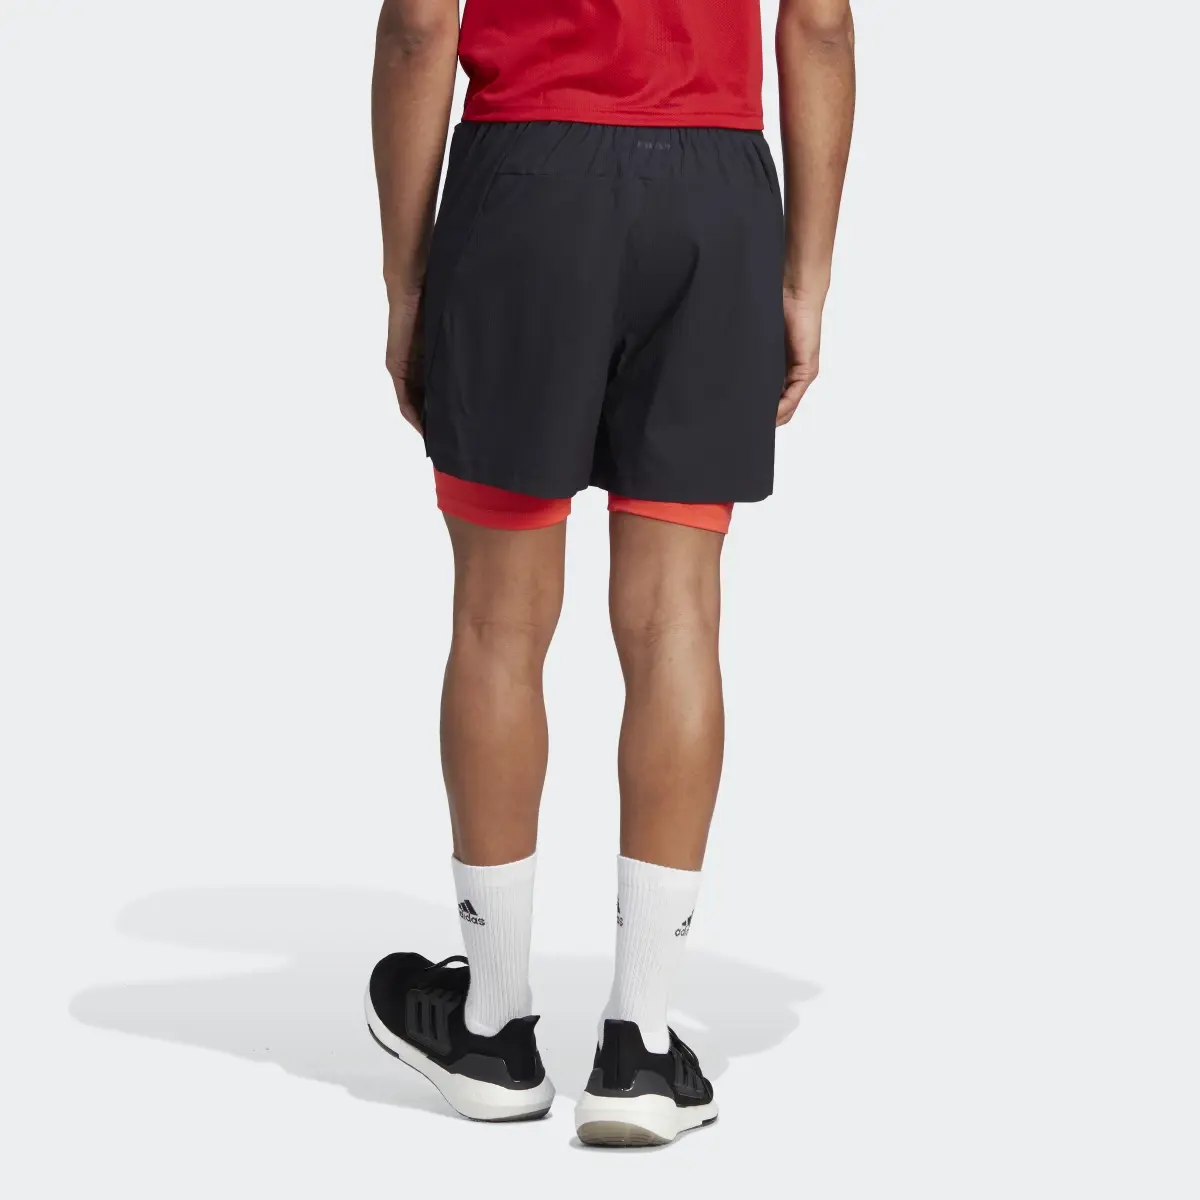 Adidas Short Power Workout Two-in-One. 2